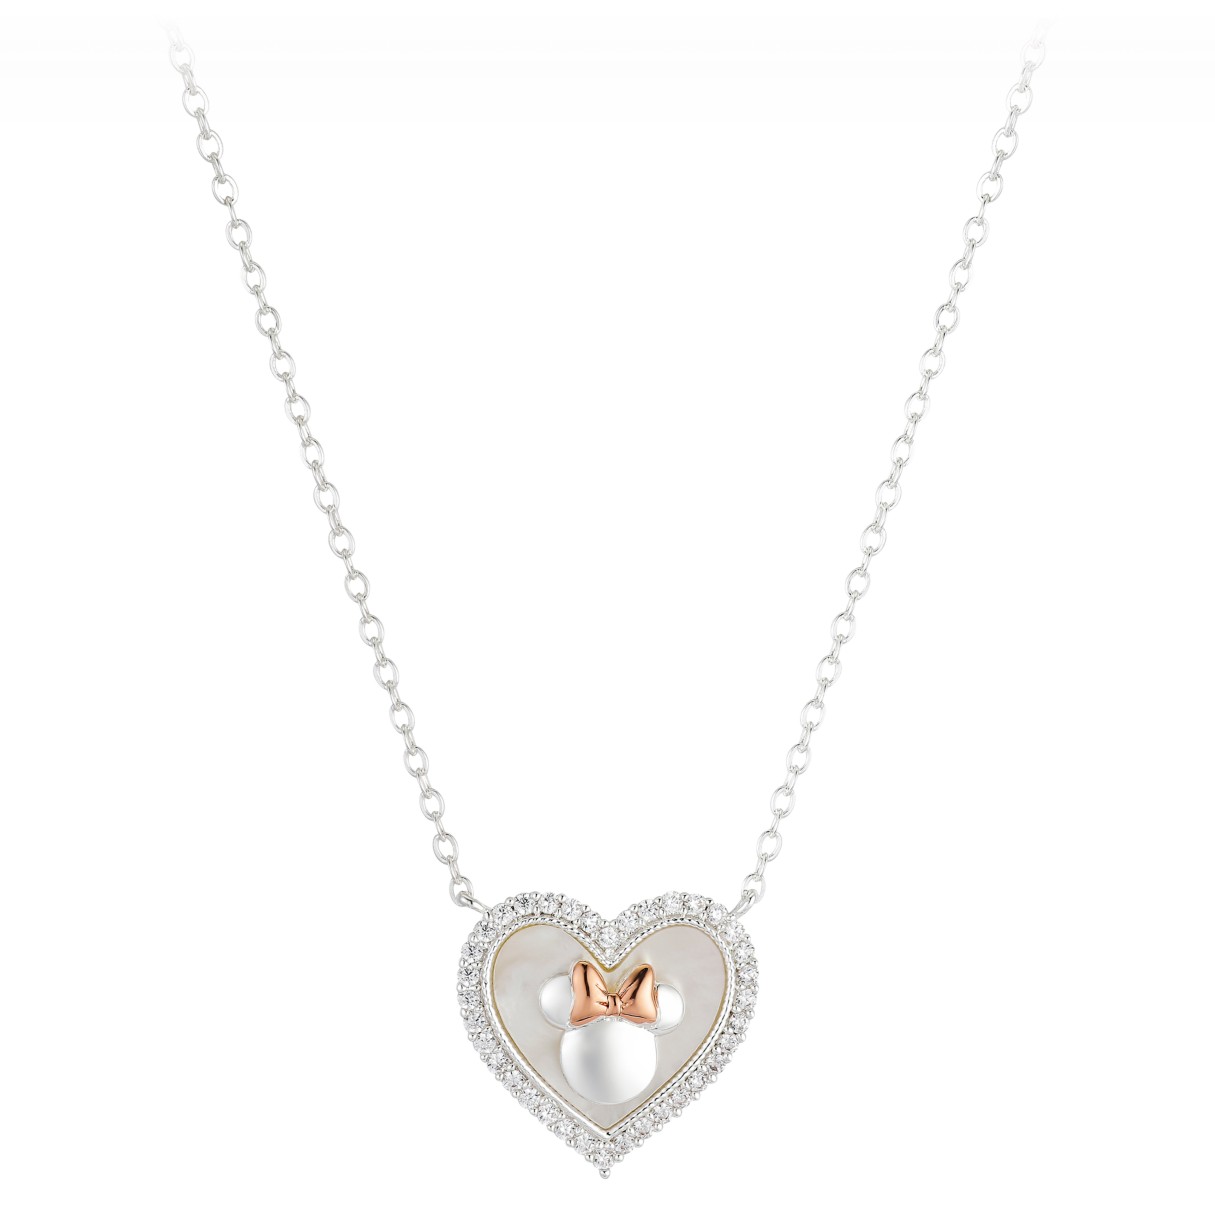 Minnie Mouse Mother of Pearl Heart Necklace